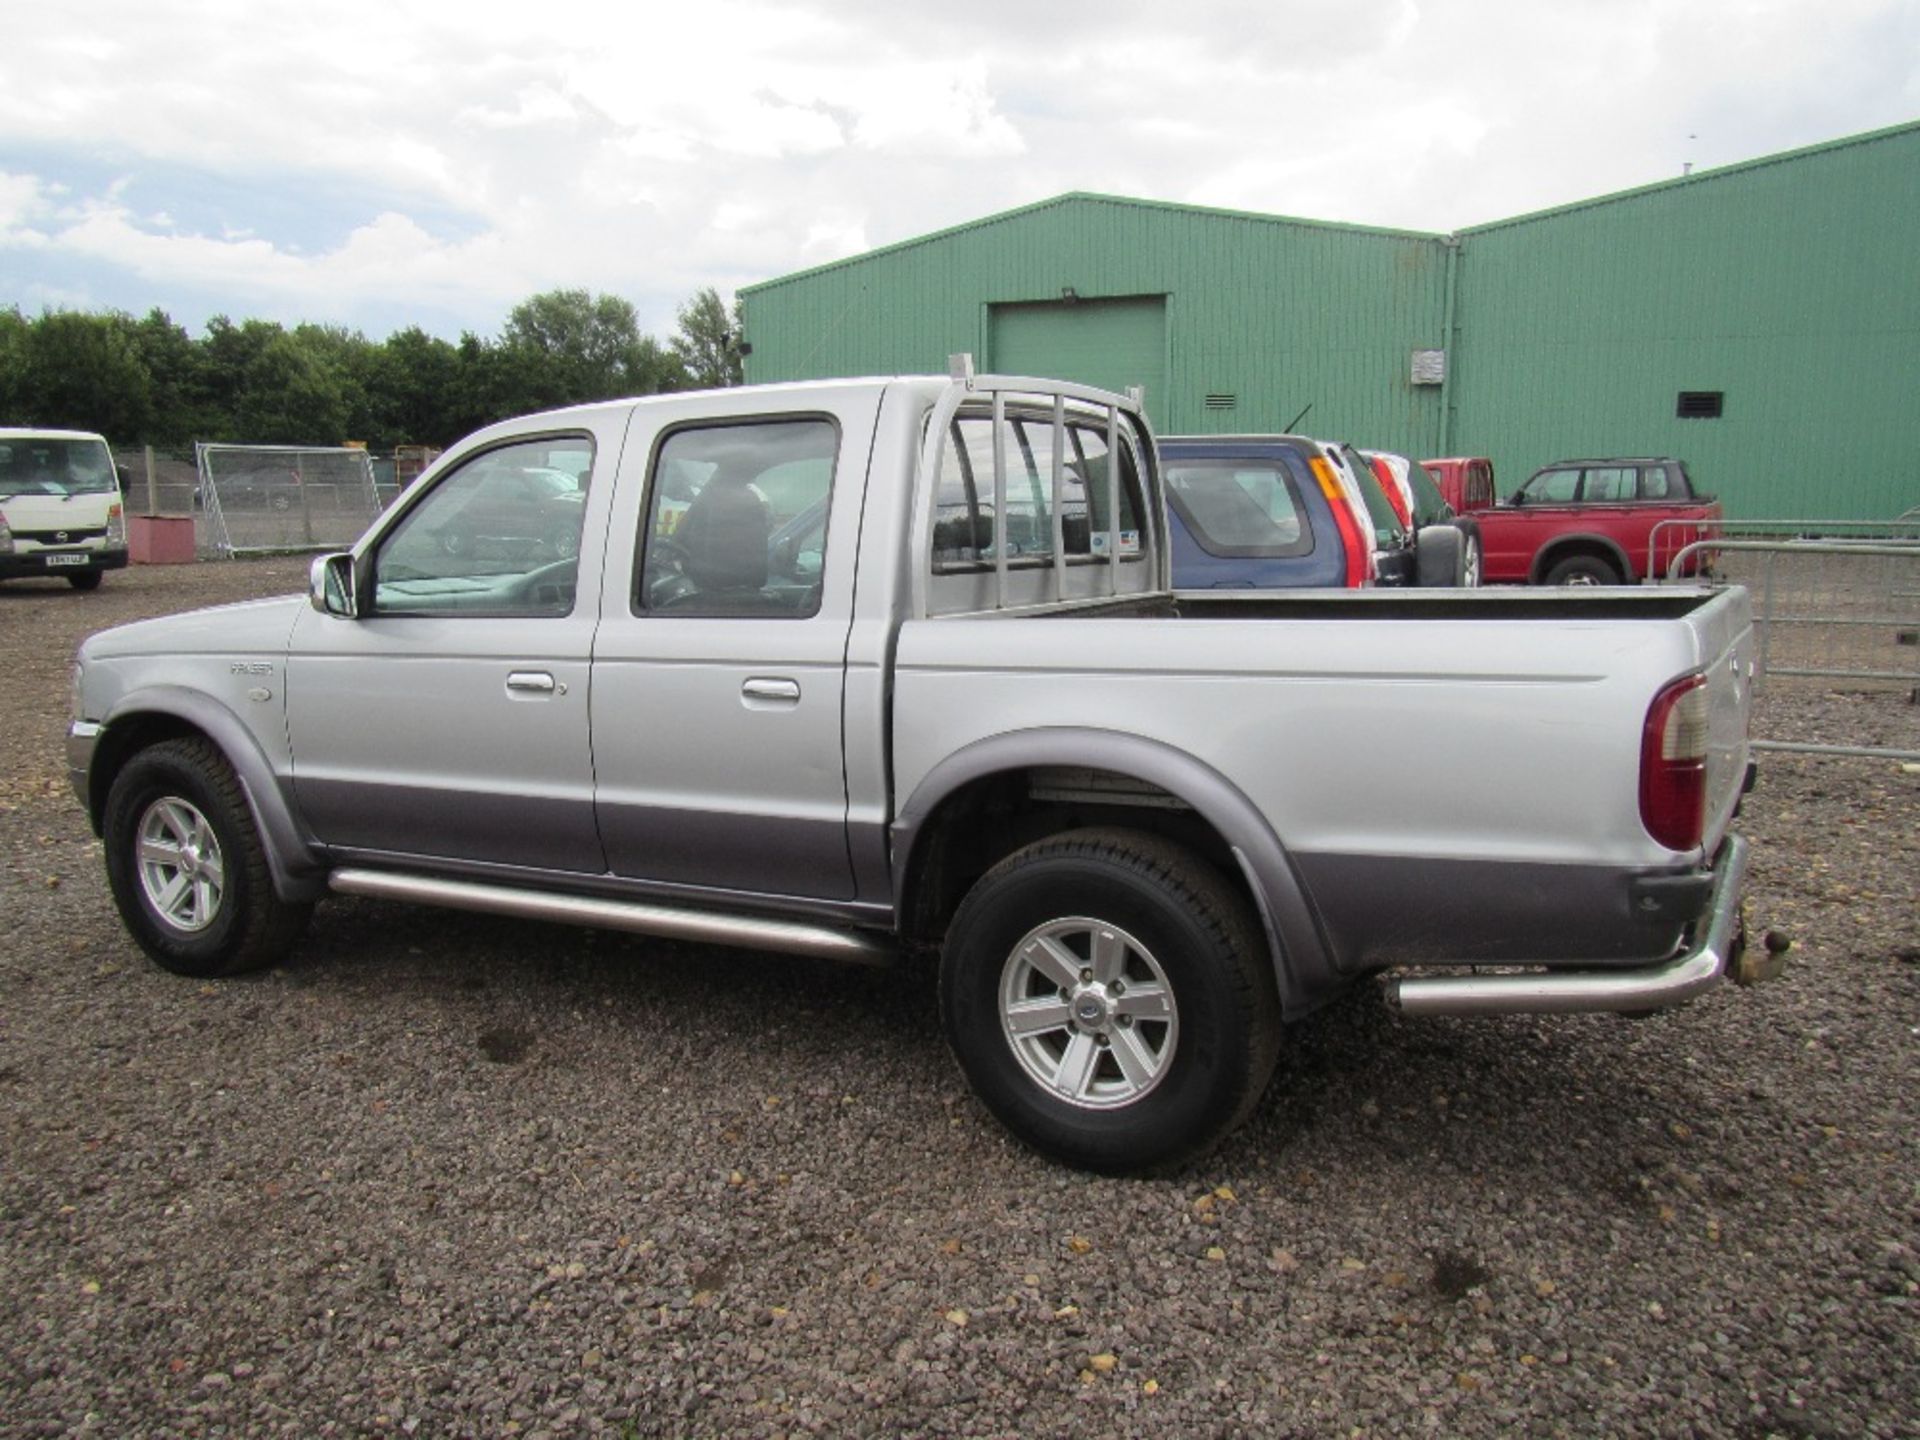 Ford Ranger 2.4 Diesel 5 Speed Manual with Crew Cab, Air Con & Leather Interior. Mileage: 116,000. - Image 2 of 5